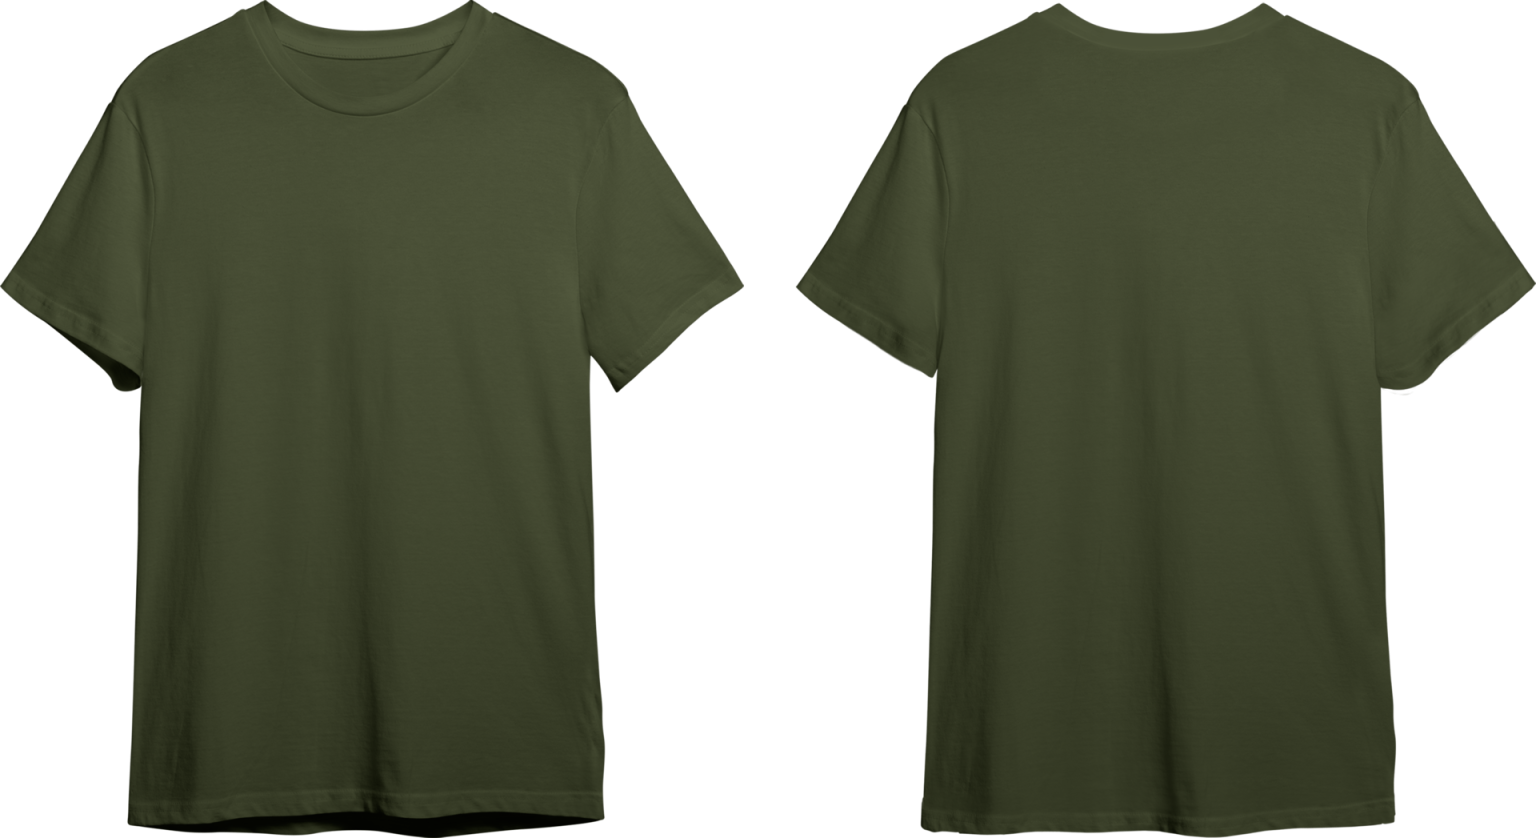 Green T Shirt Png Transparent Images Free Download Hq Png Image